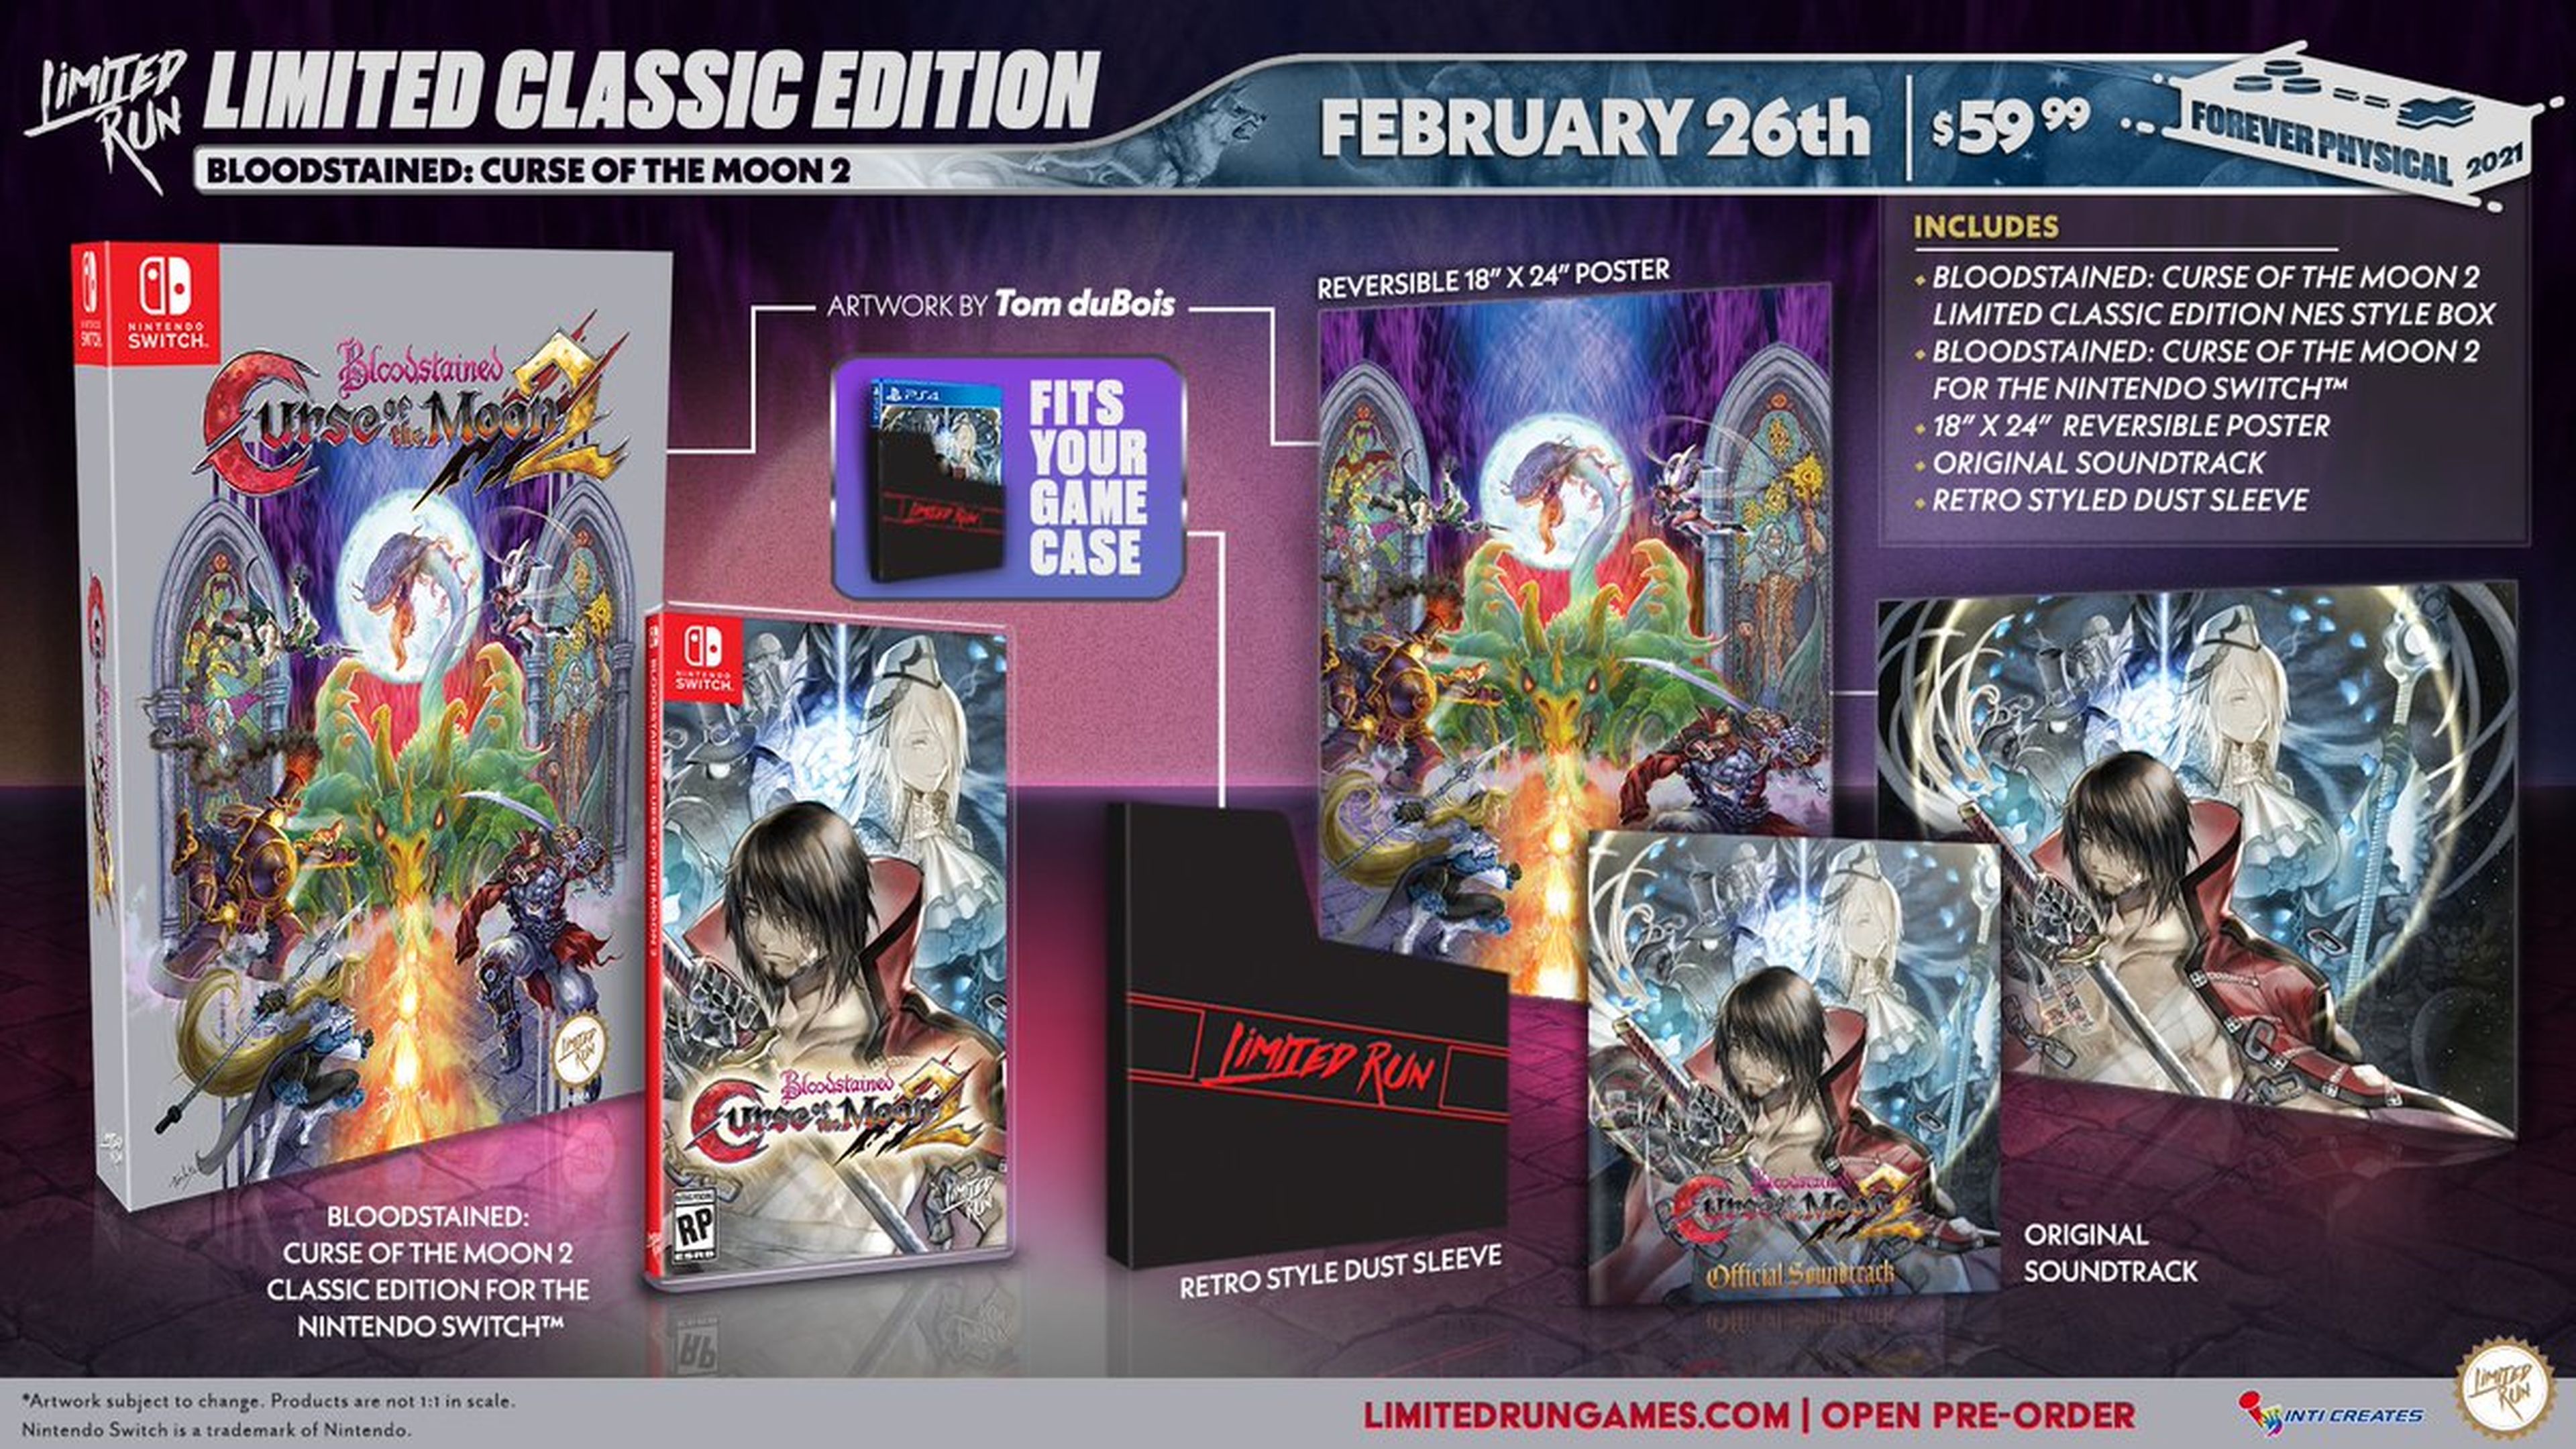 Bloodstained Curse of the Moon 2 Limited Run Games